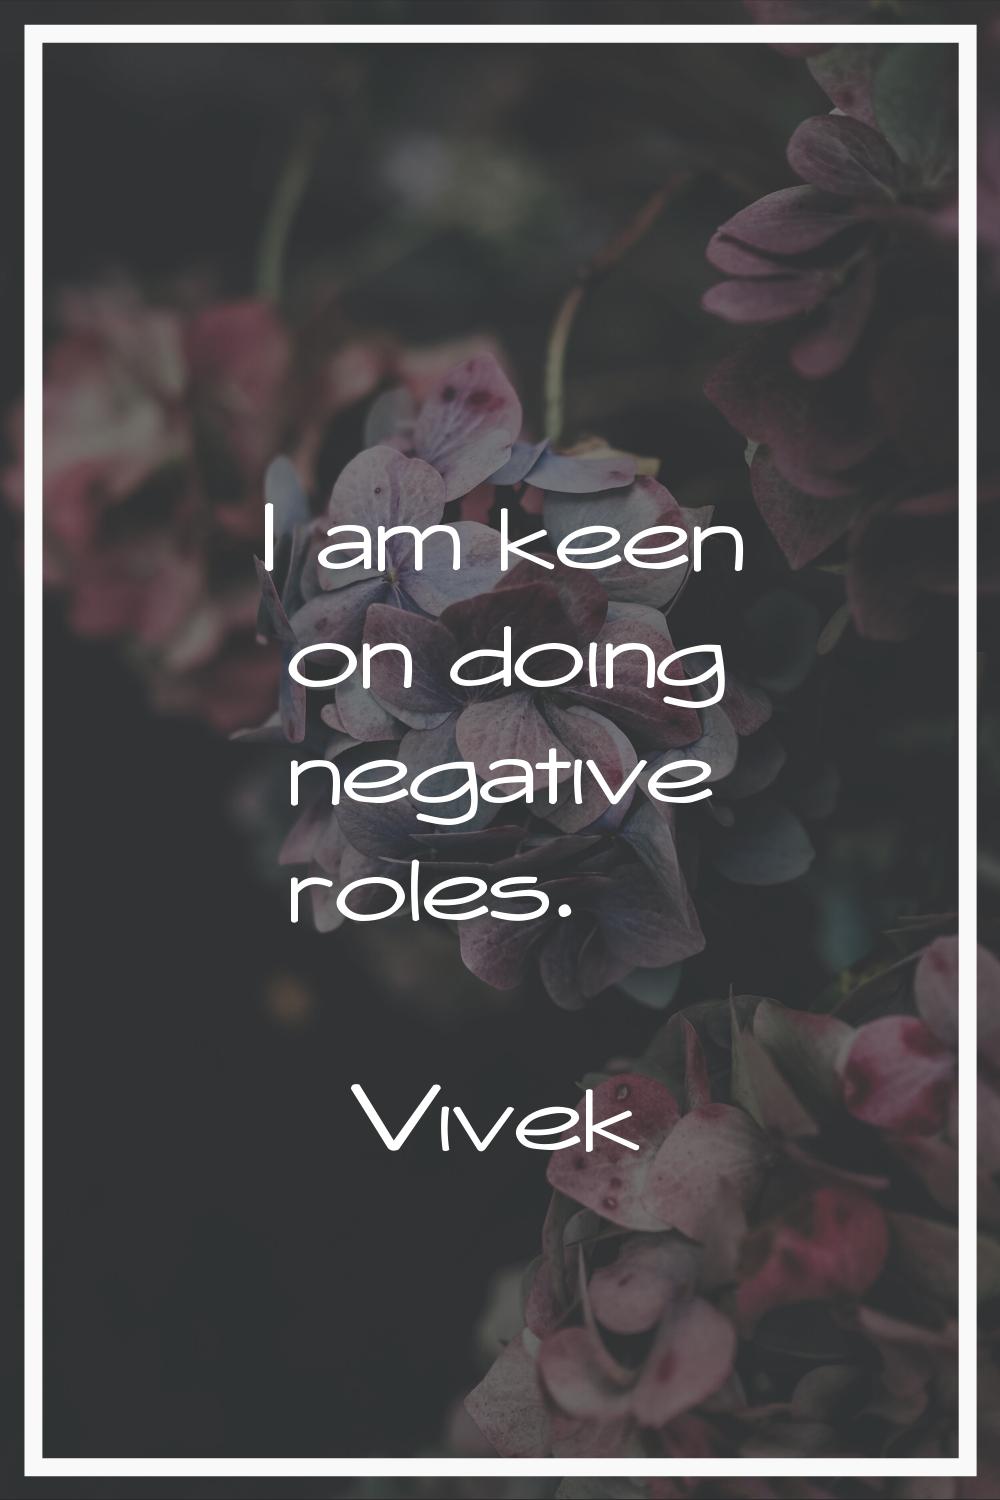 I am keen on doing negative roles.